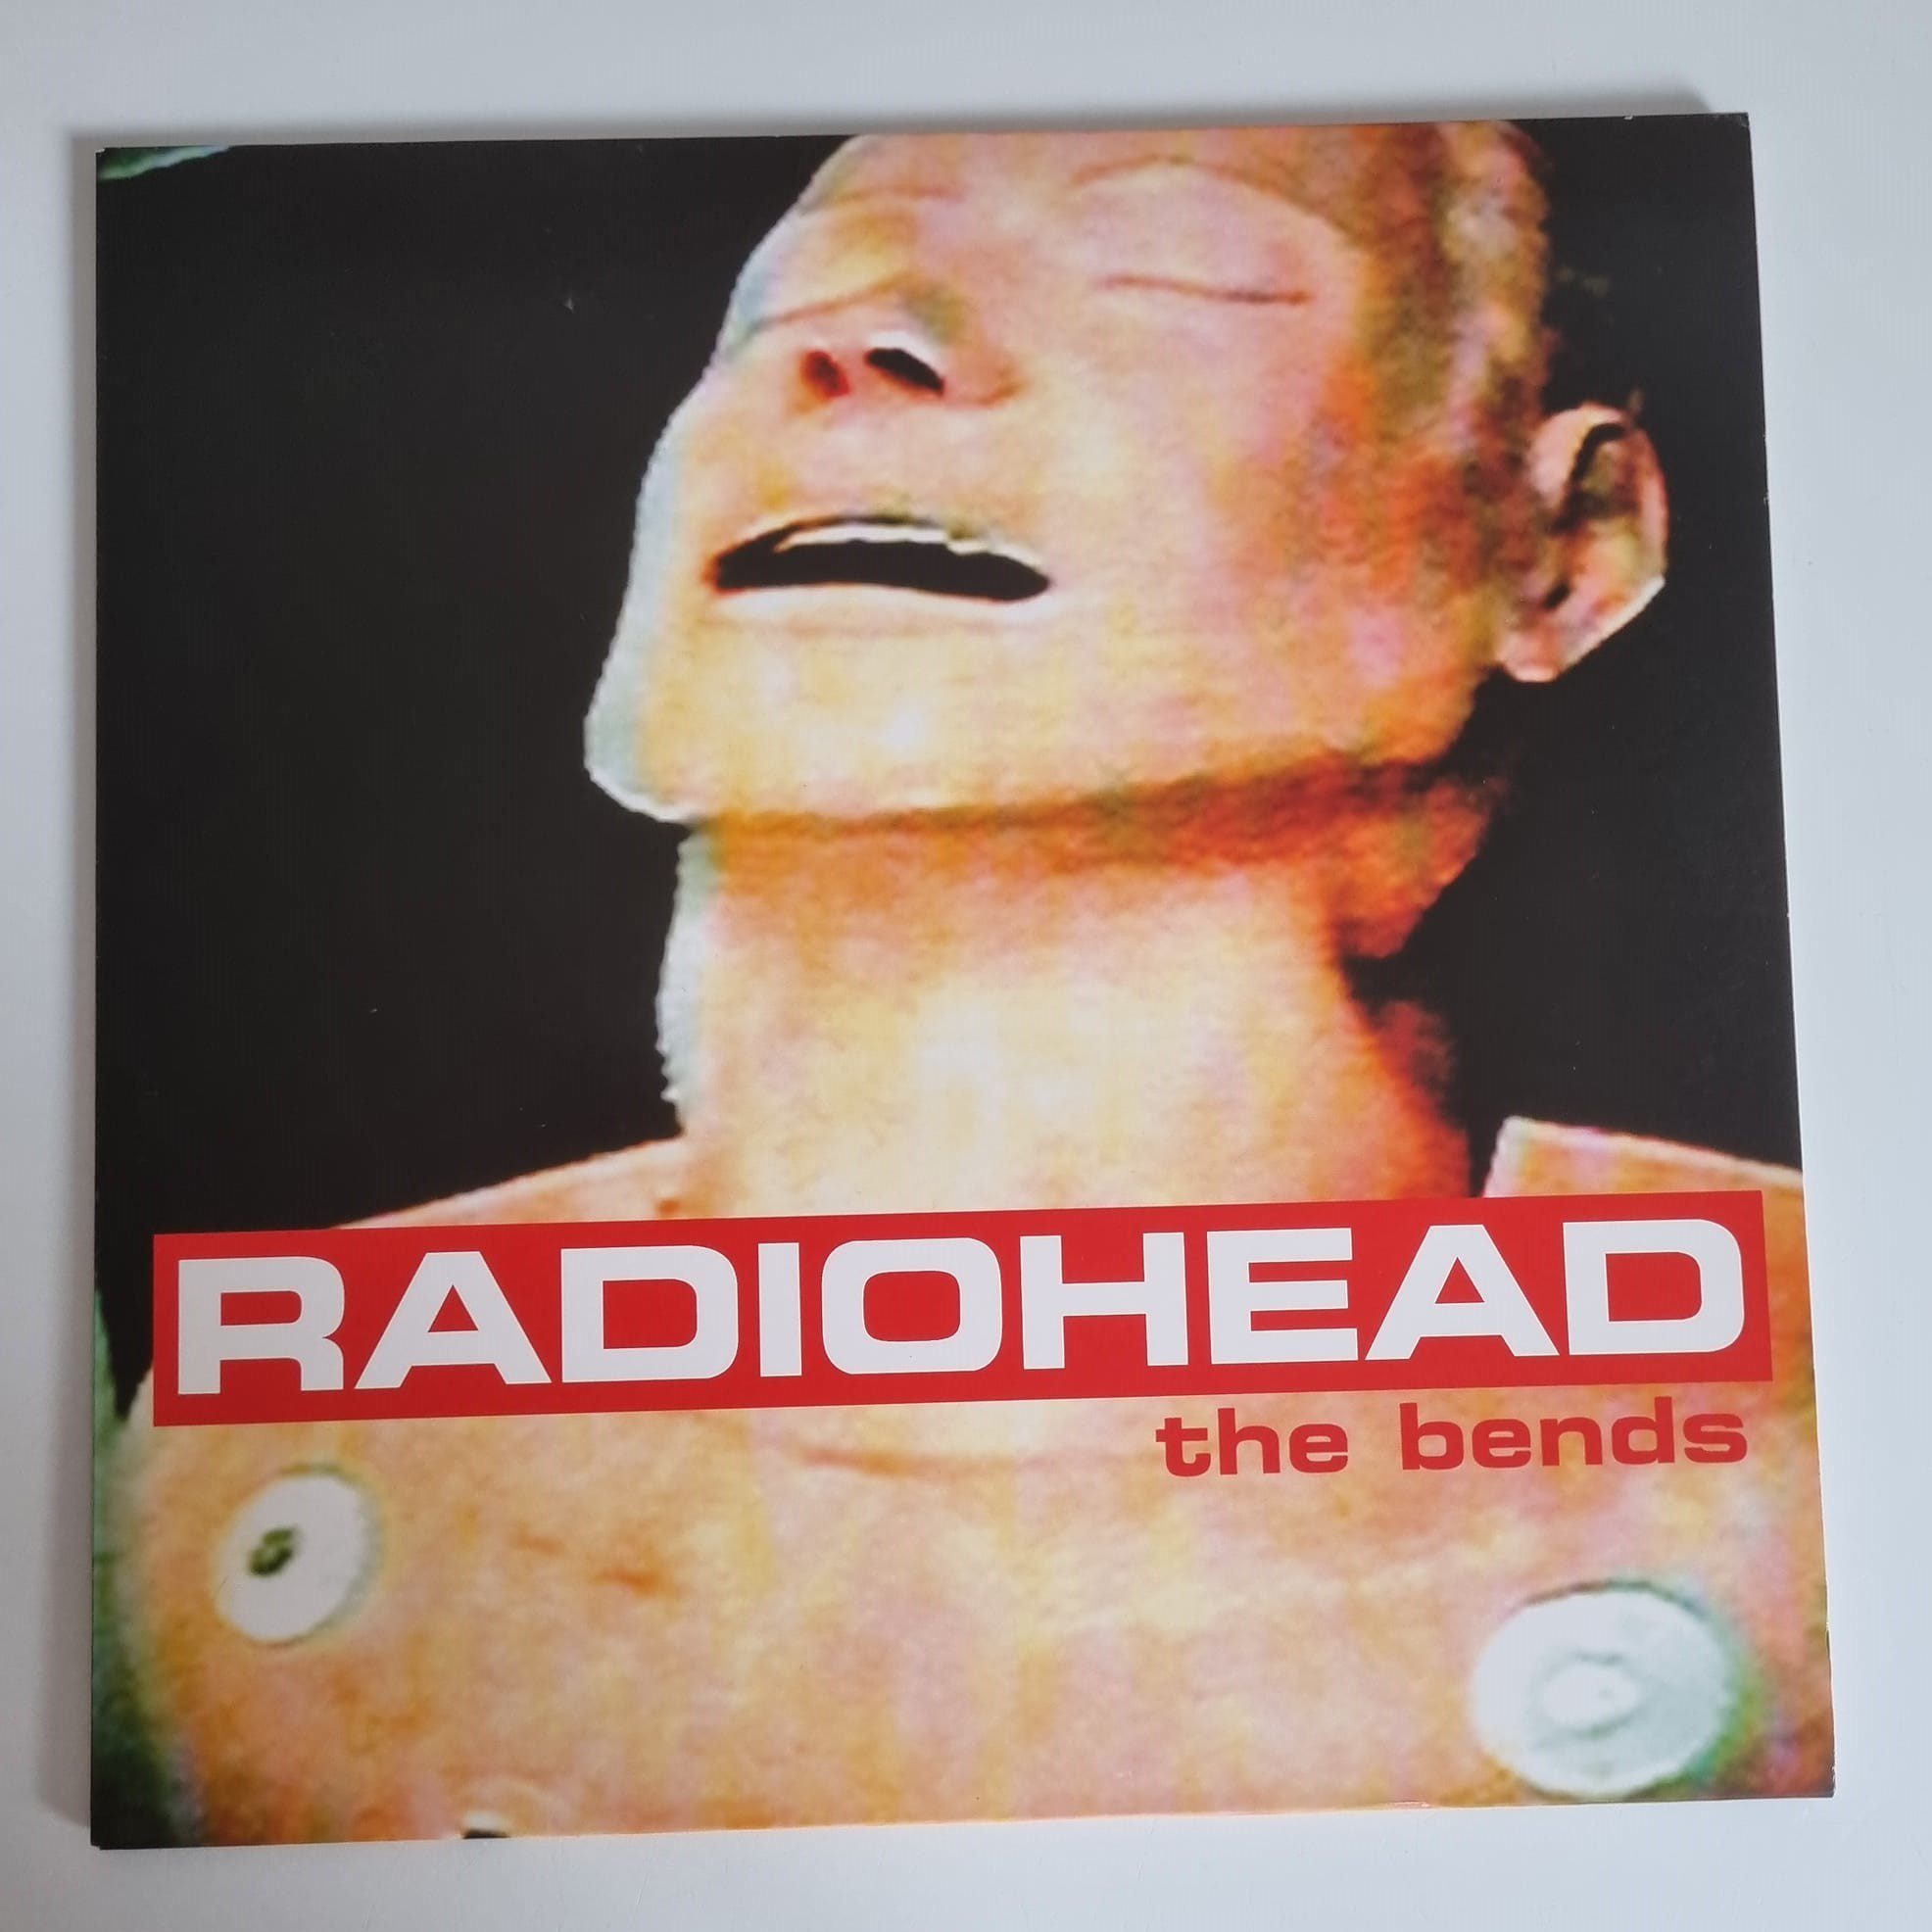 Buy this rare Radiohead record by clicking here